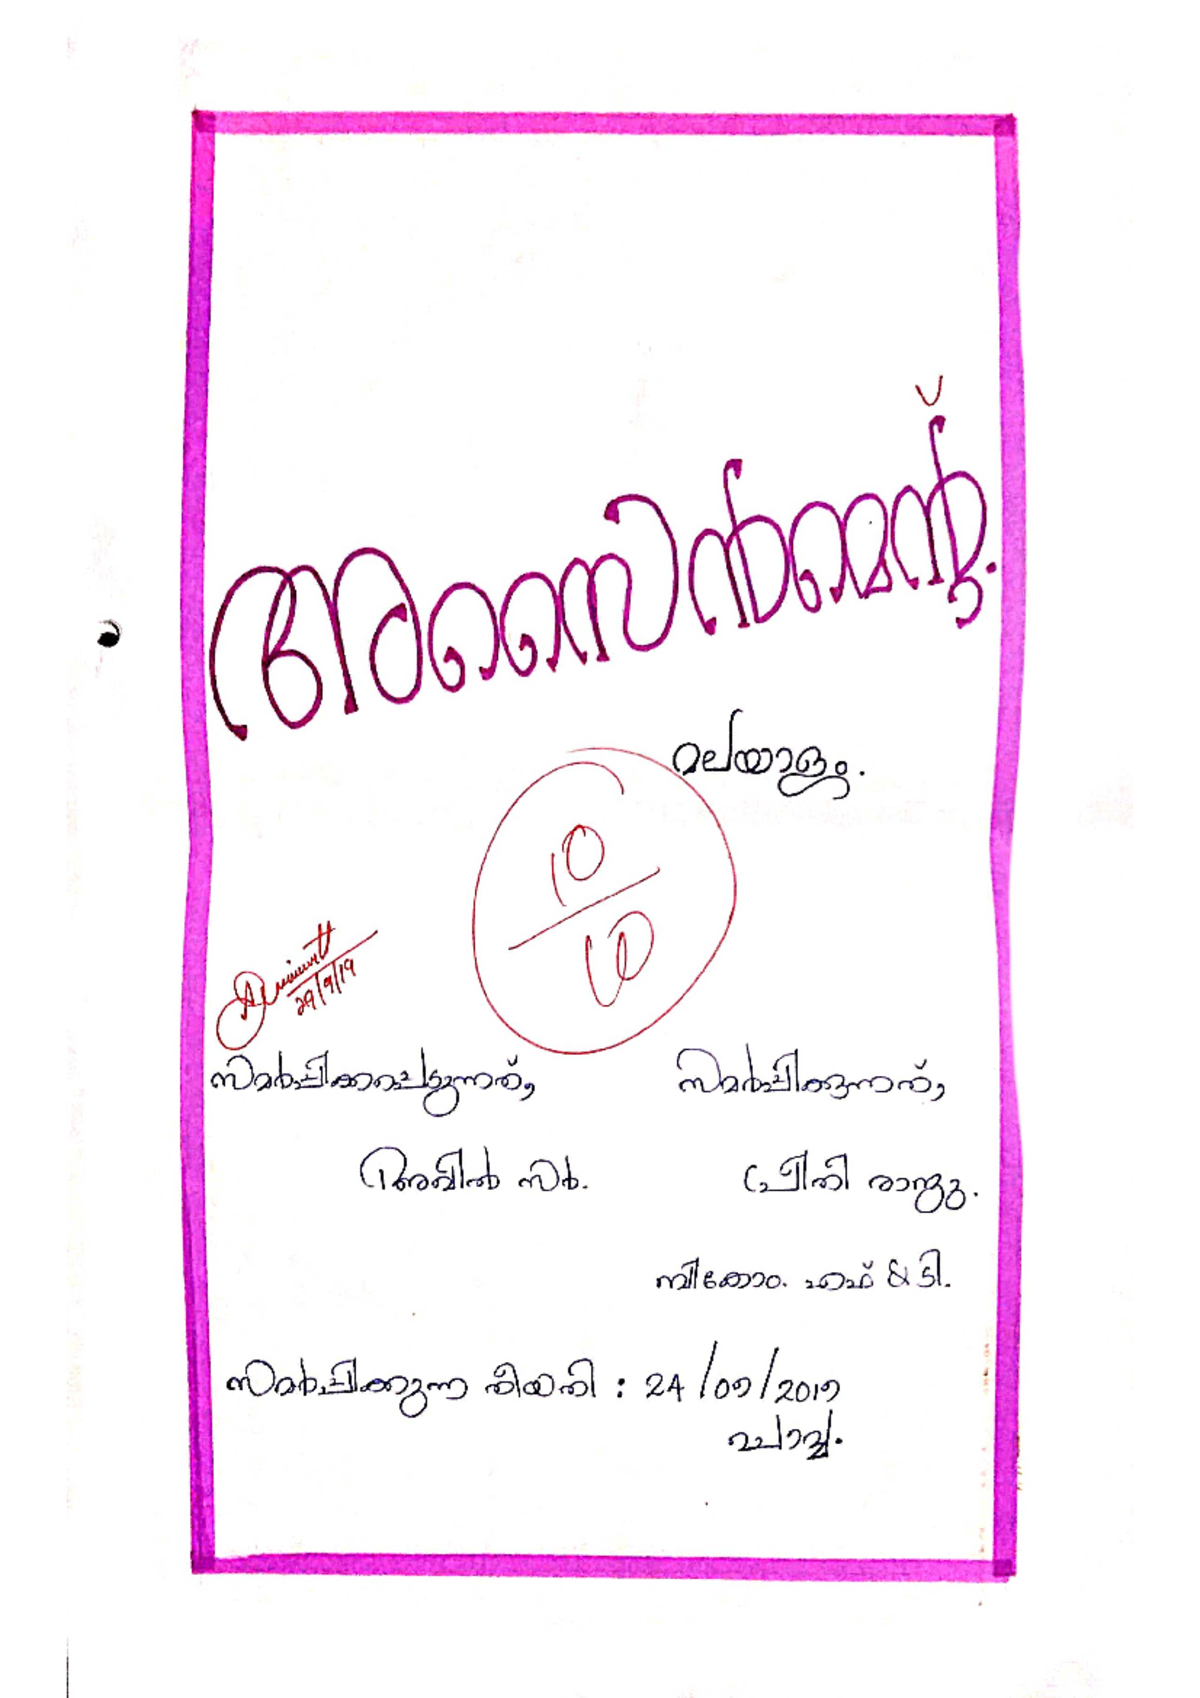 malayalam meaning of assignment